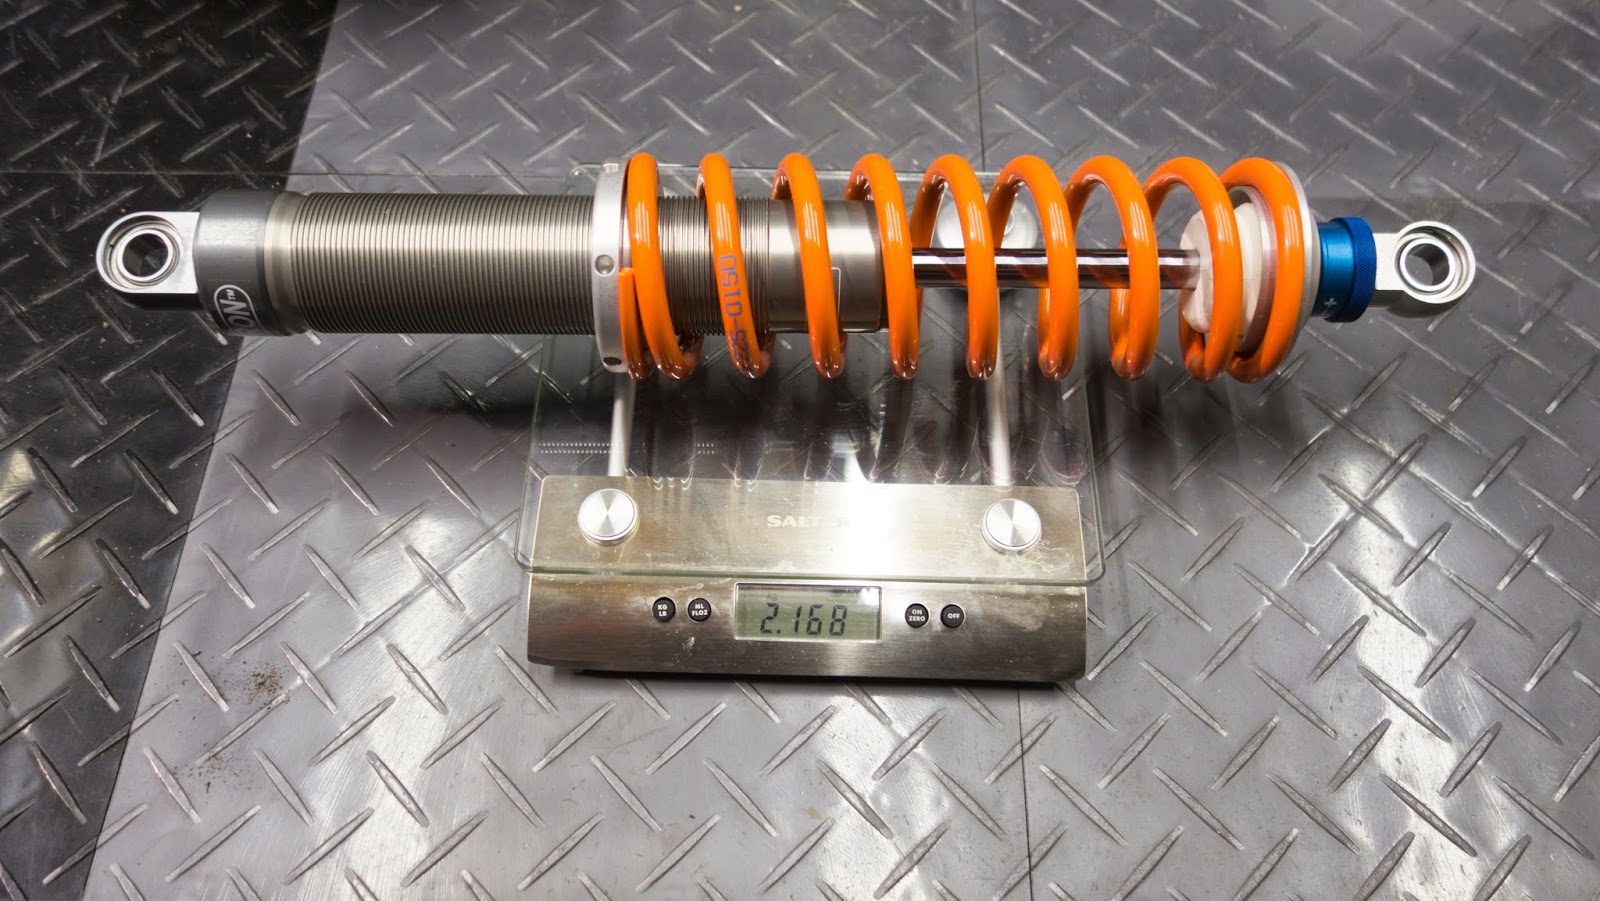 Rear Nitron Race R1 shock for Caterham weighed in at 2.168kg